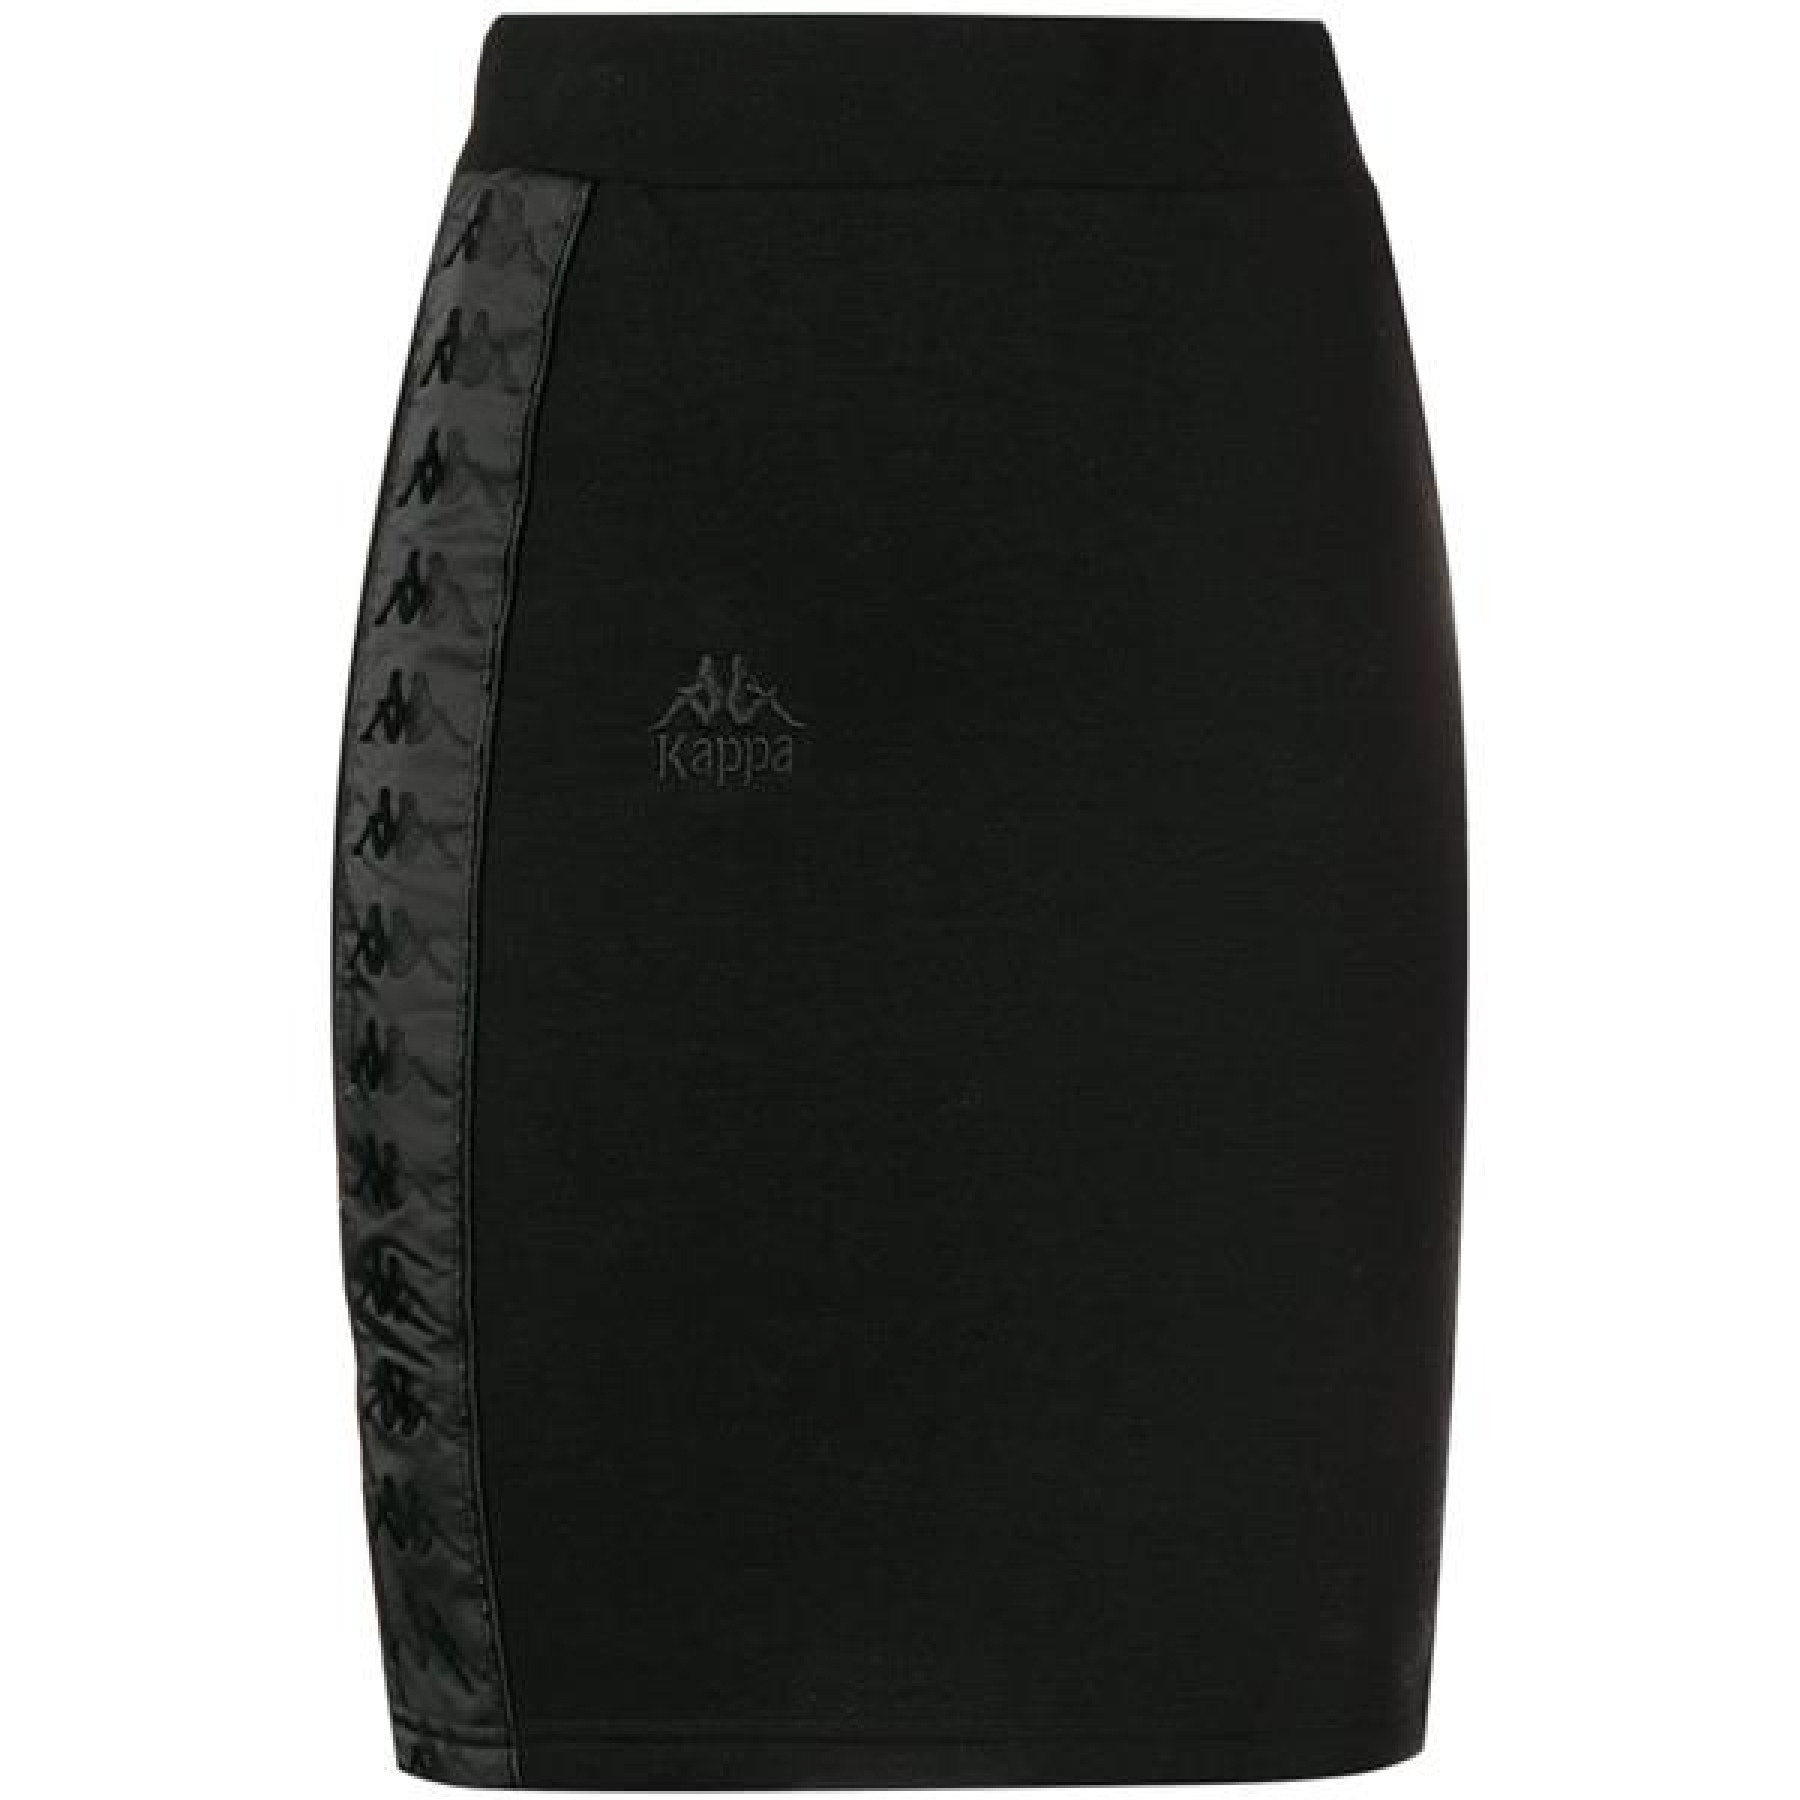 Rok Kappa authentic Aval